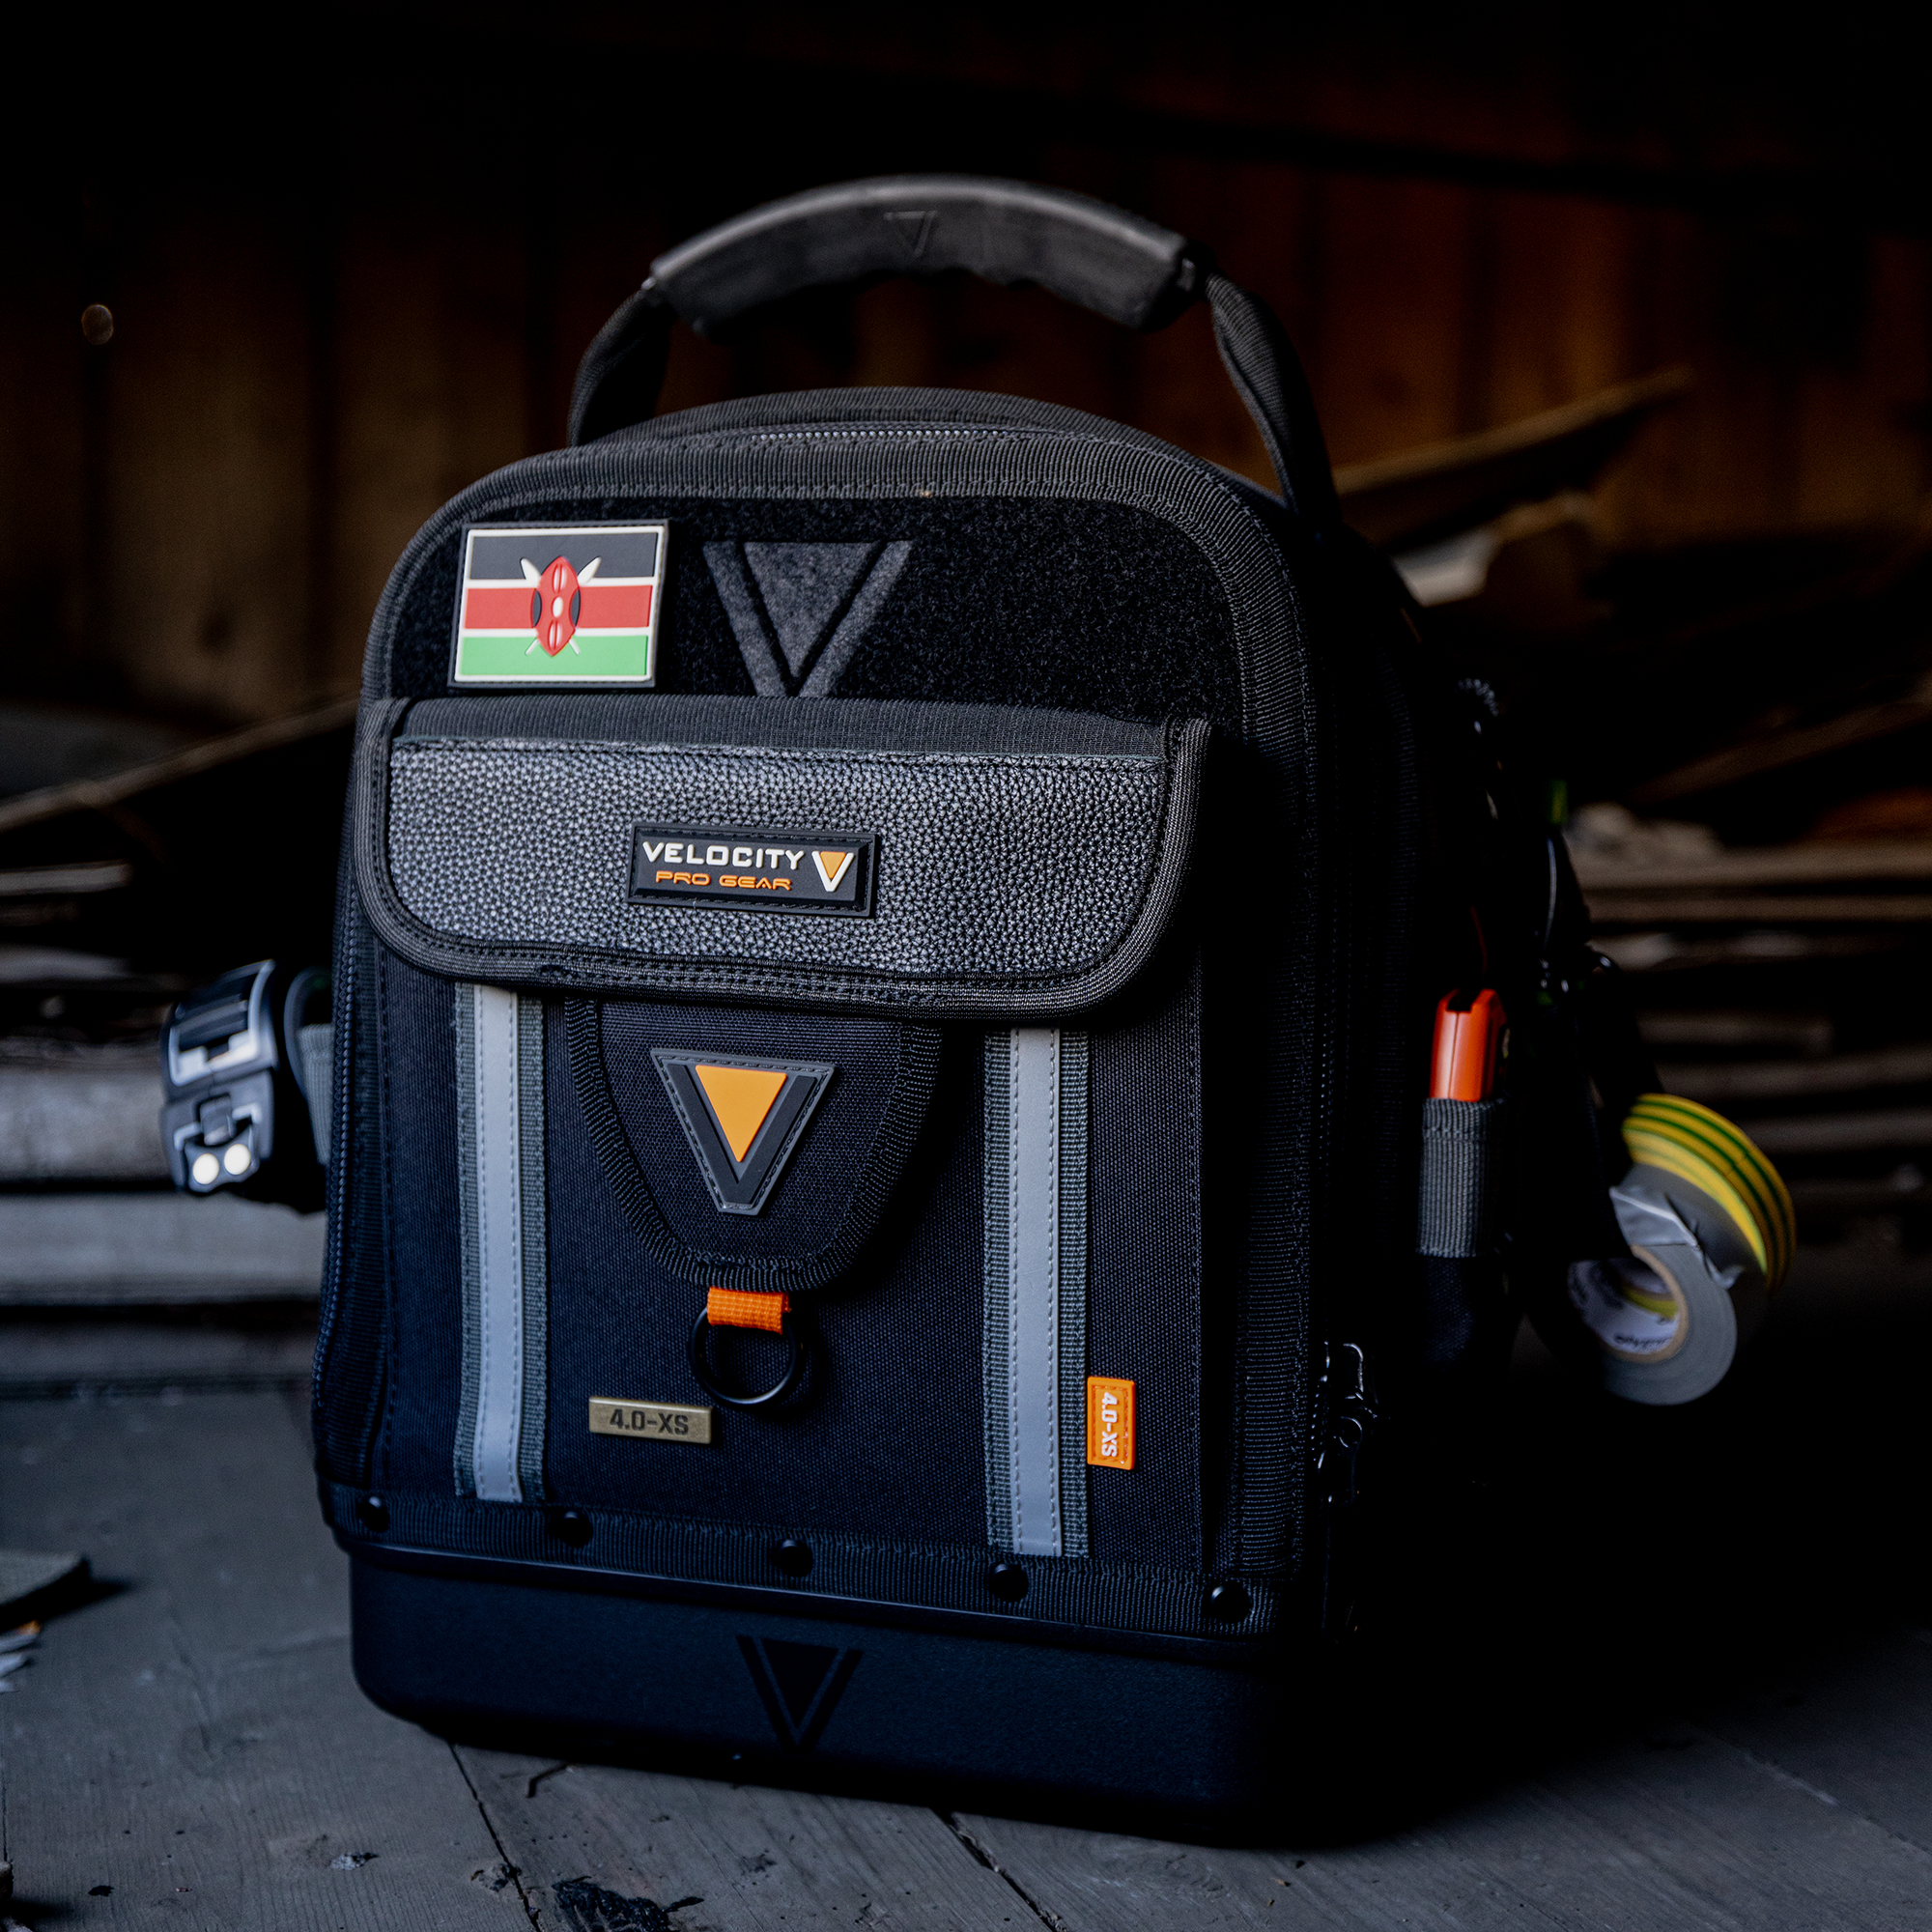 Rogue 4.0XS Tech case with Kenya flag patch and tools on the outside, sitting in a work site